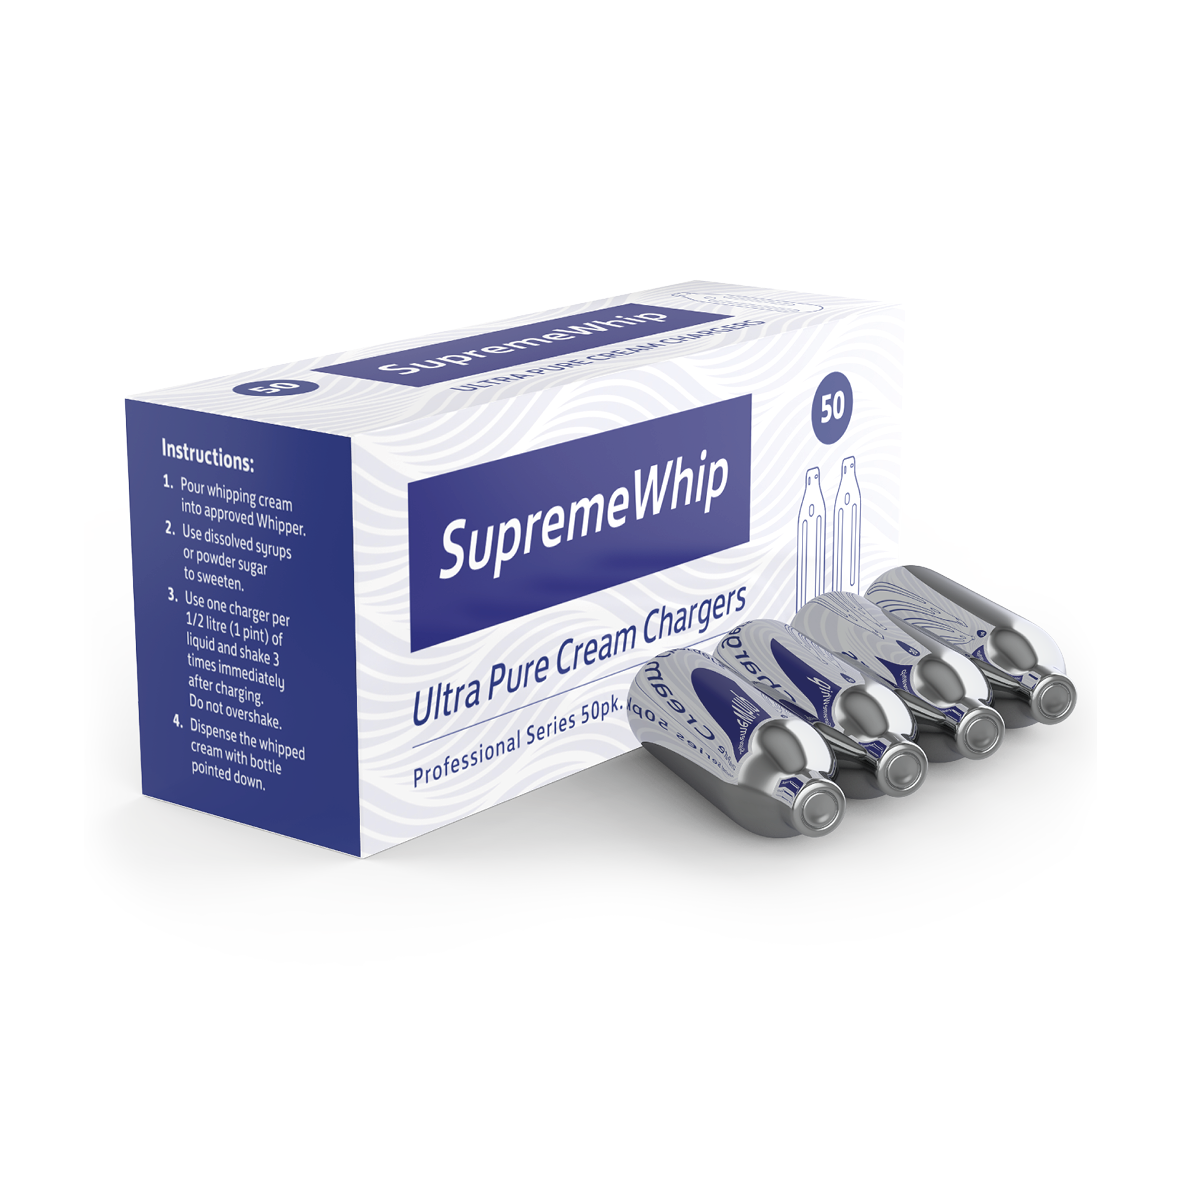 SupremeWhip Cream Chargers - 50 Pack WHOLESALE